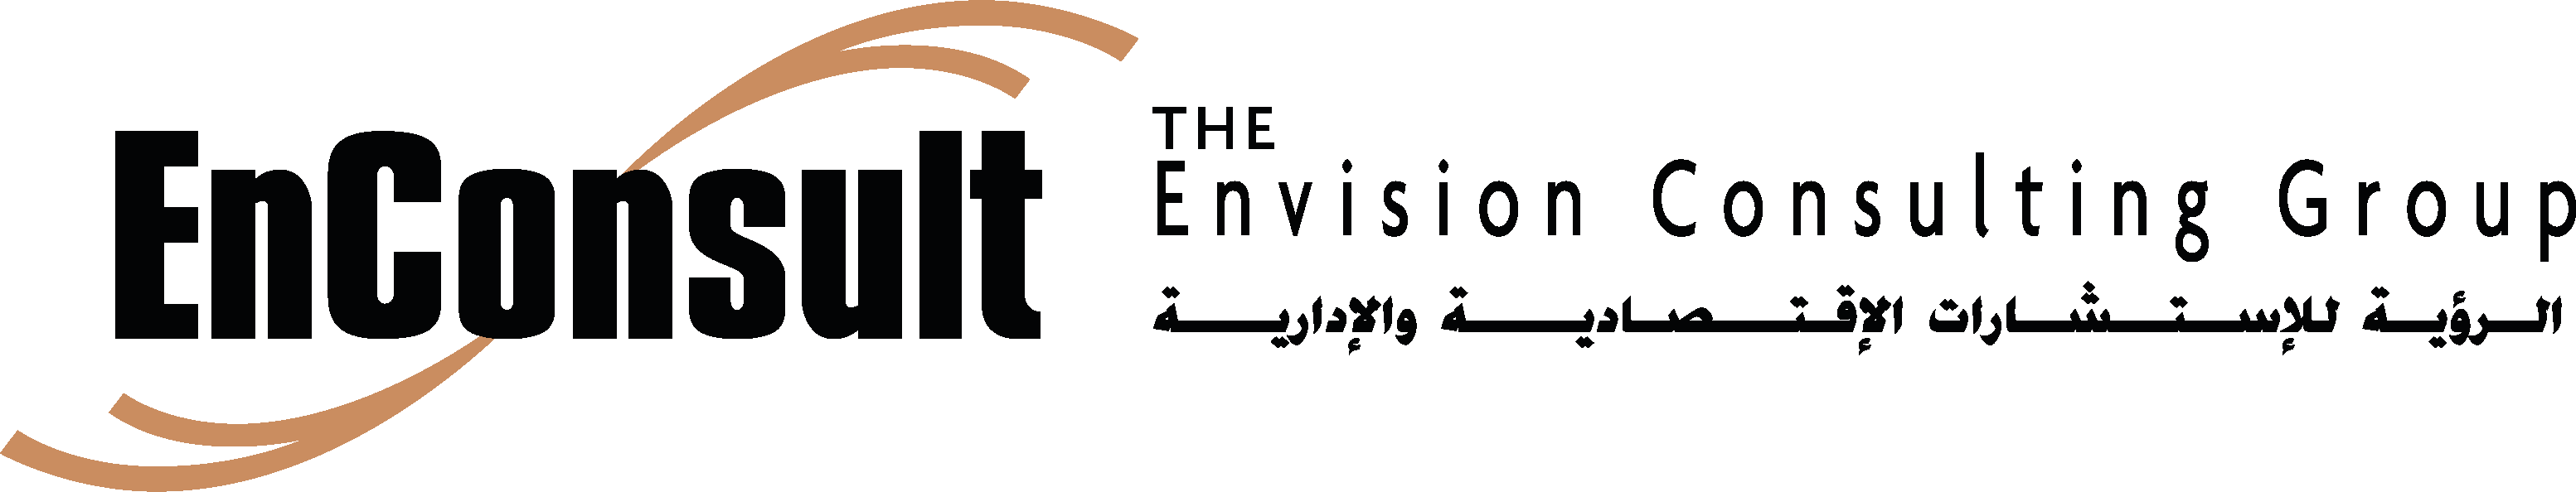 Envision Consulting Group